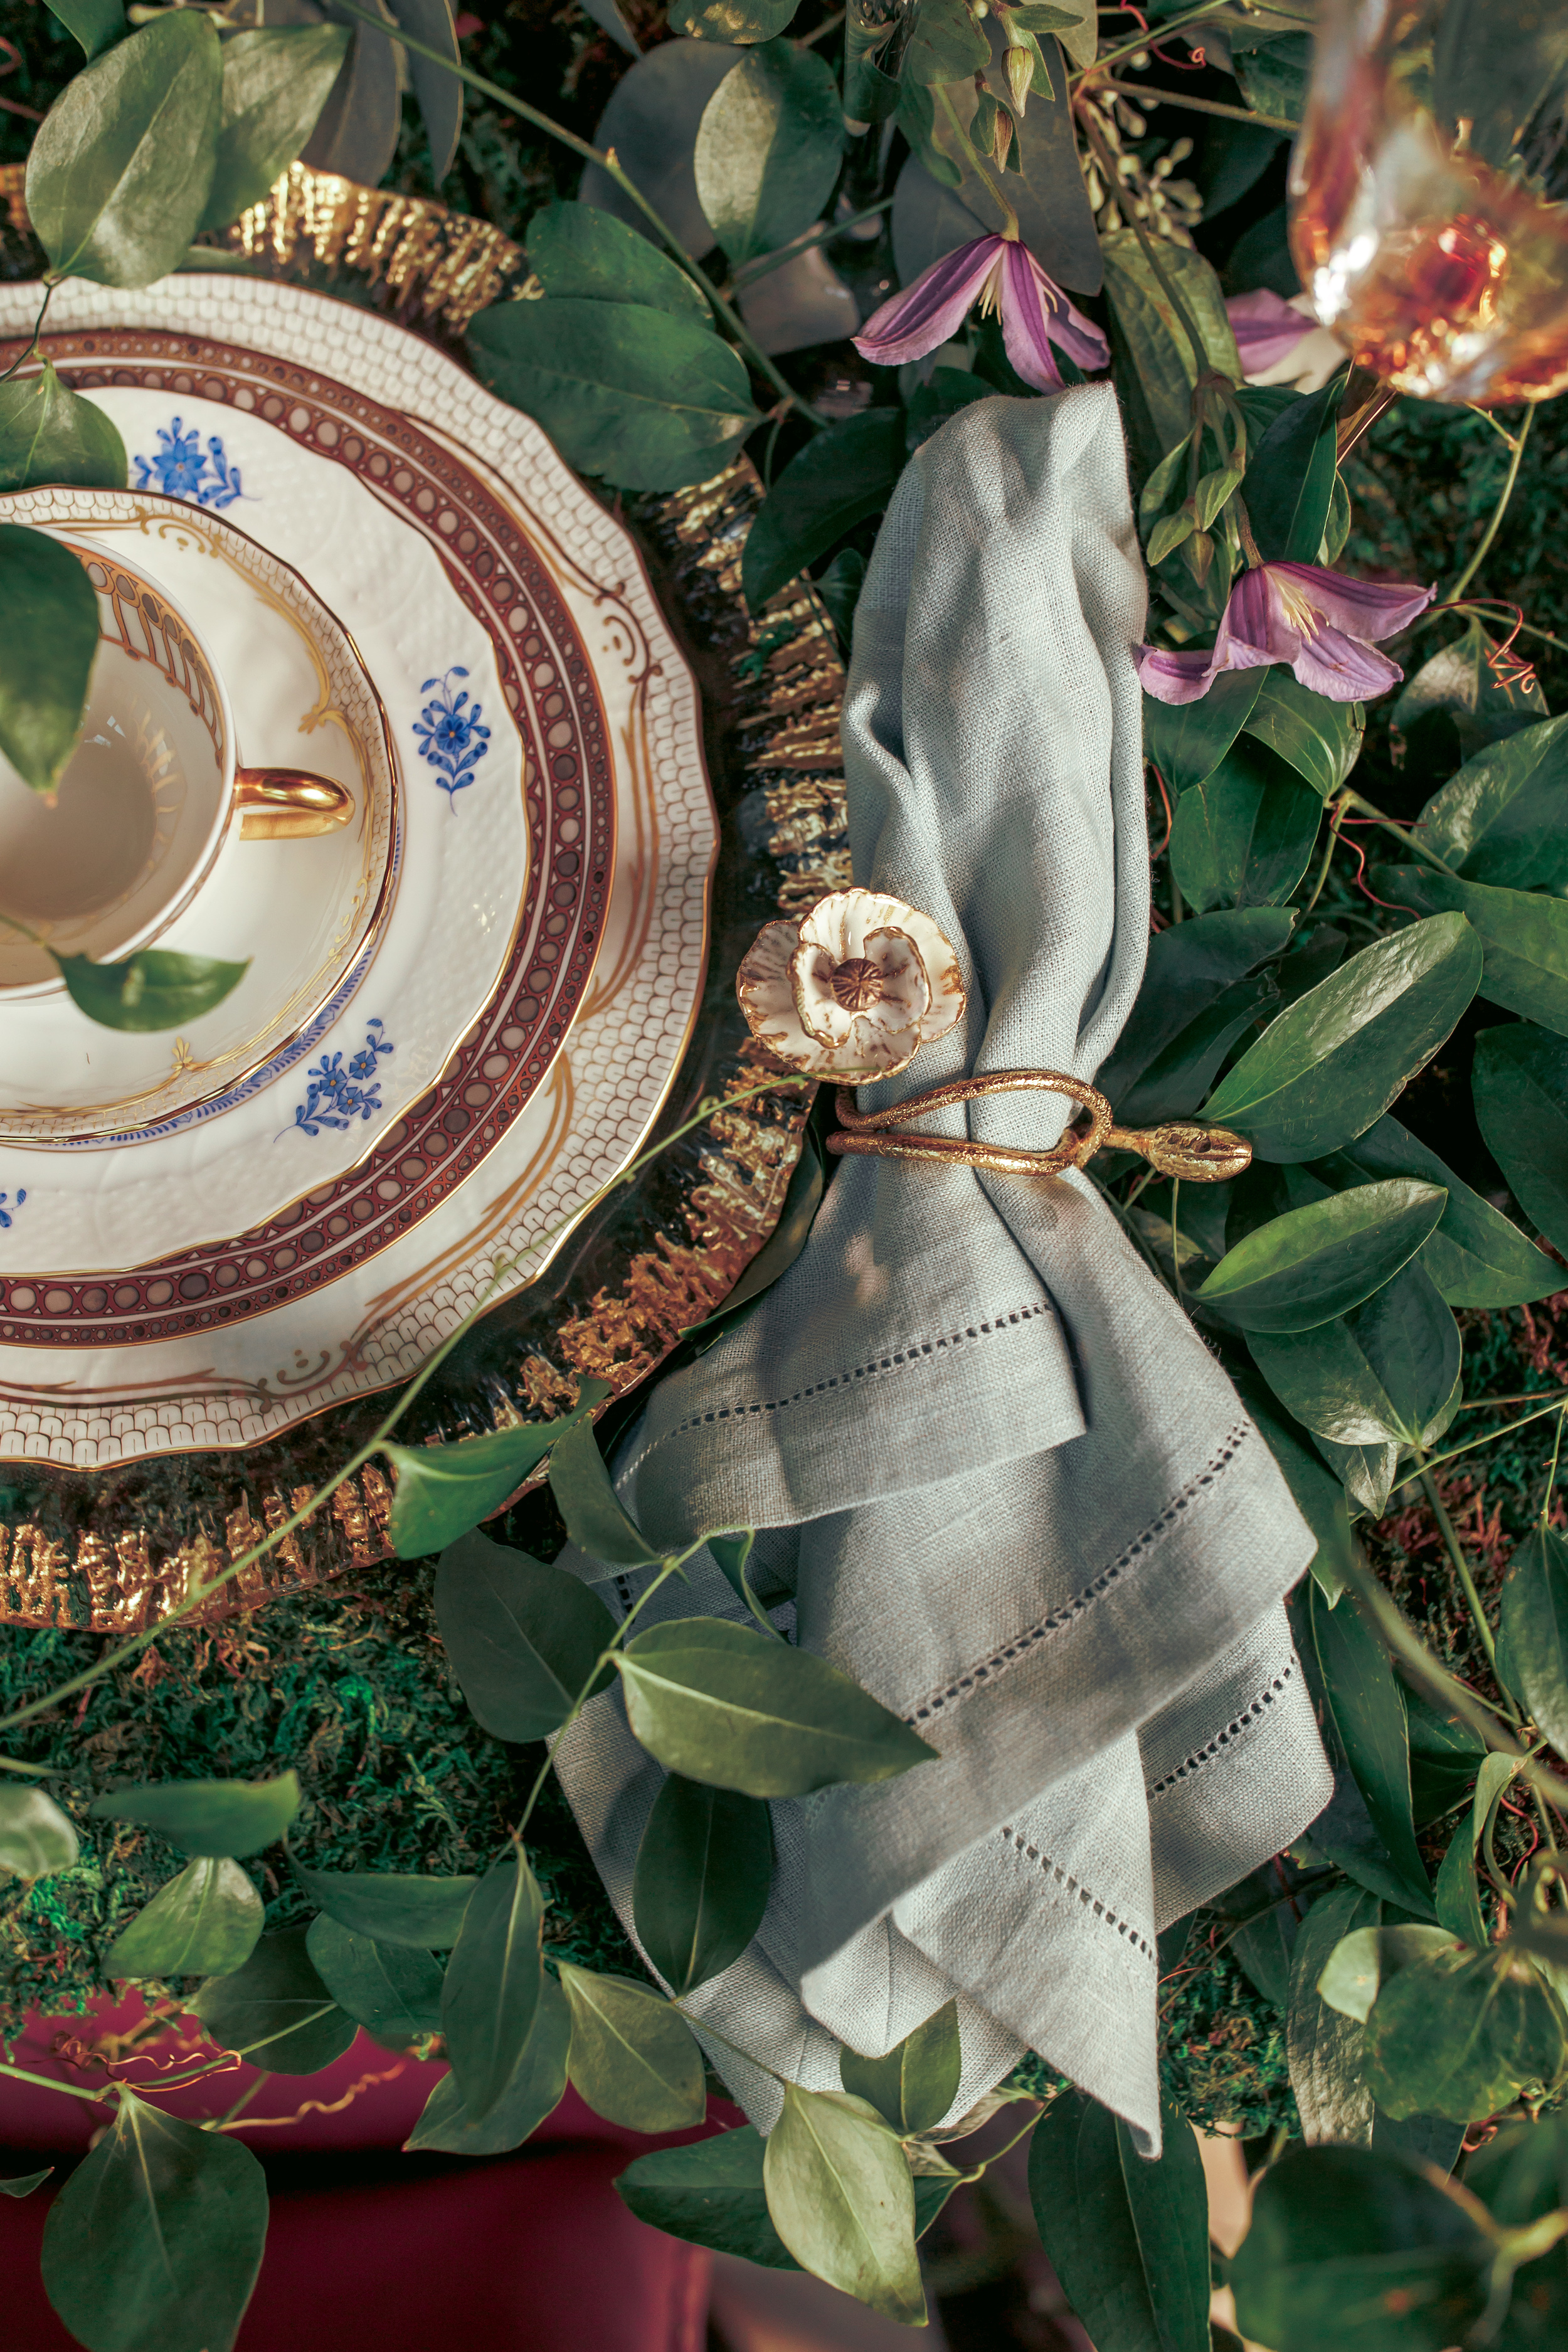 Fine china by Herend and a linen napkin with a floral napkin atop a vine and floral covered table at a styled shoot at The Bell Tower on 34th.